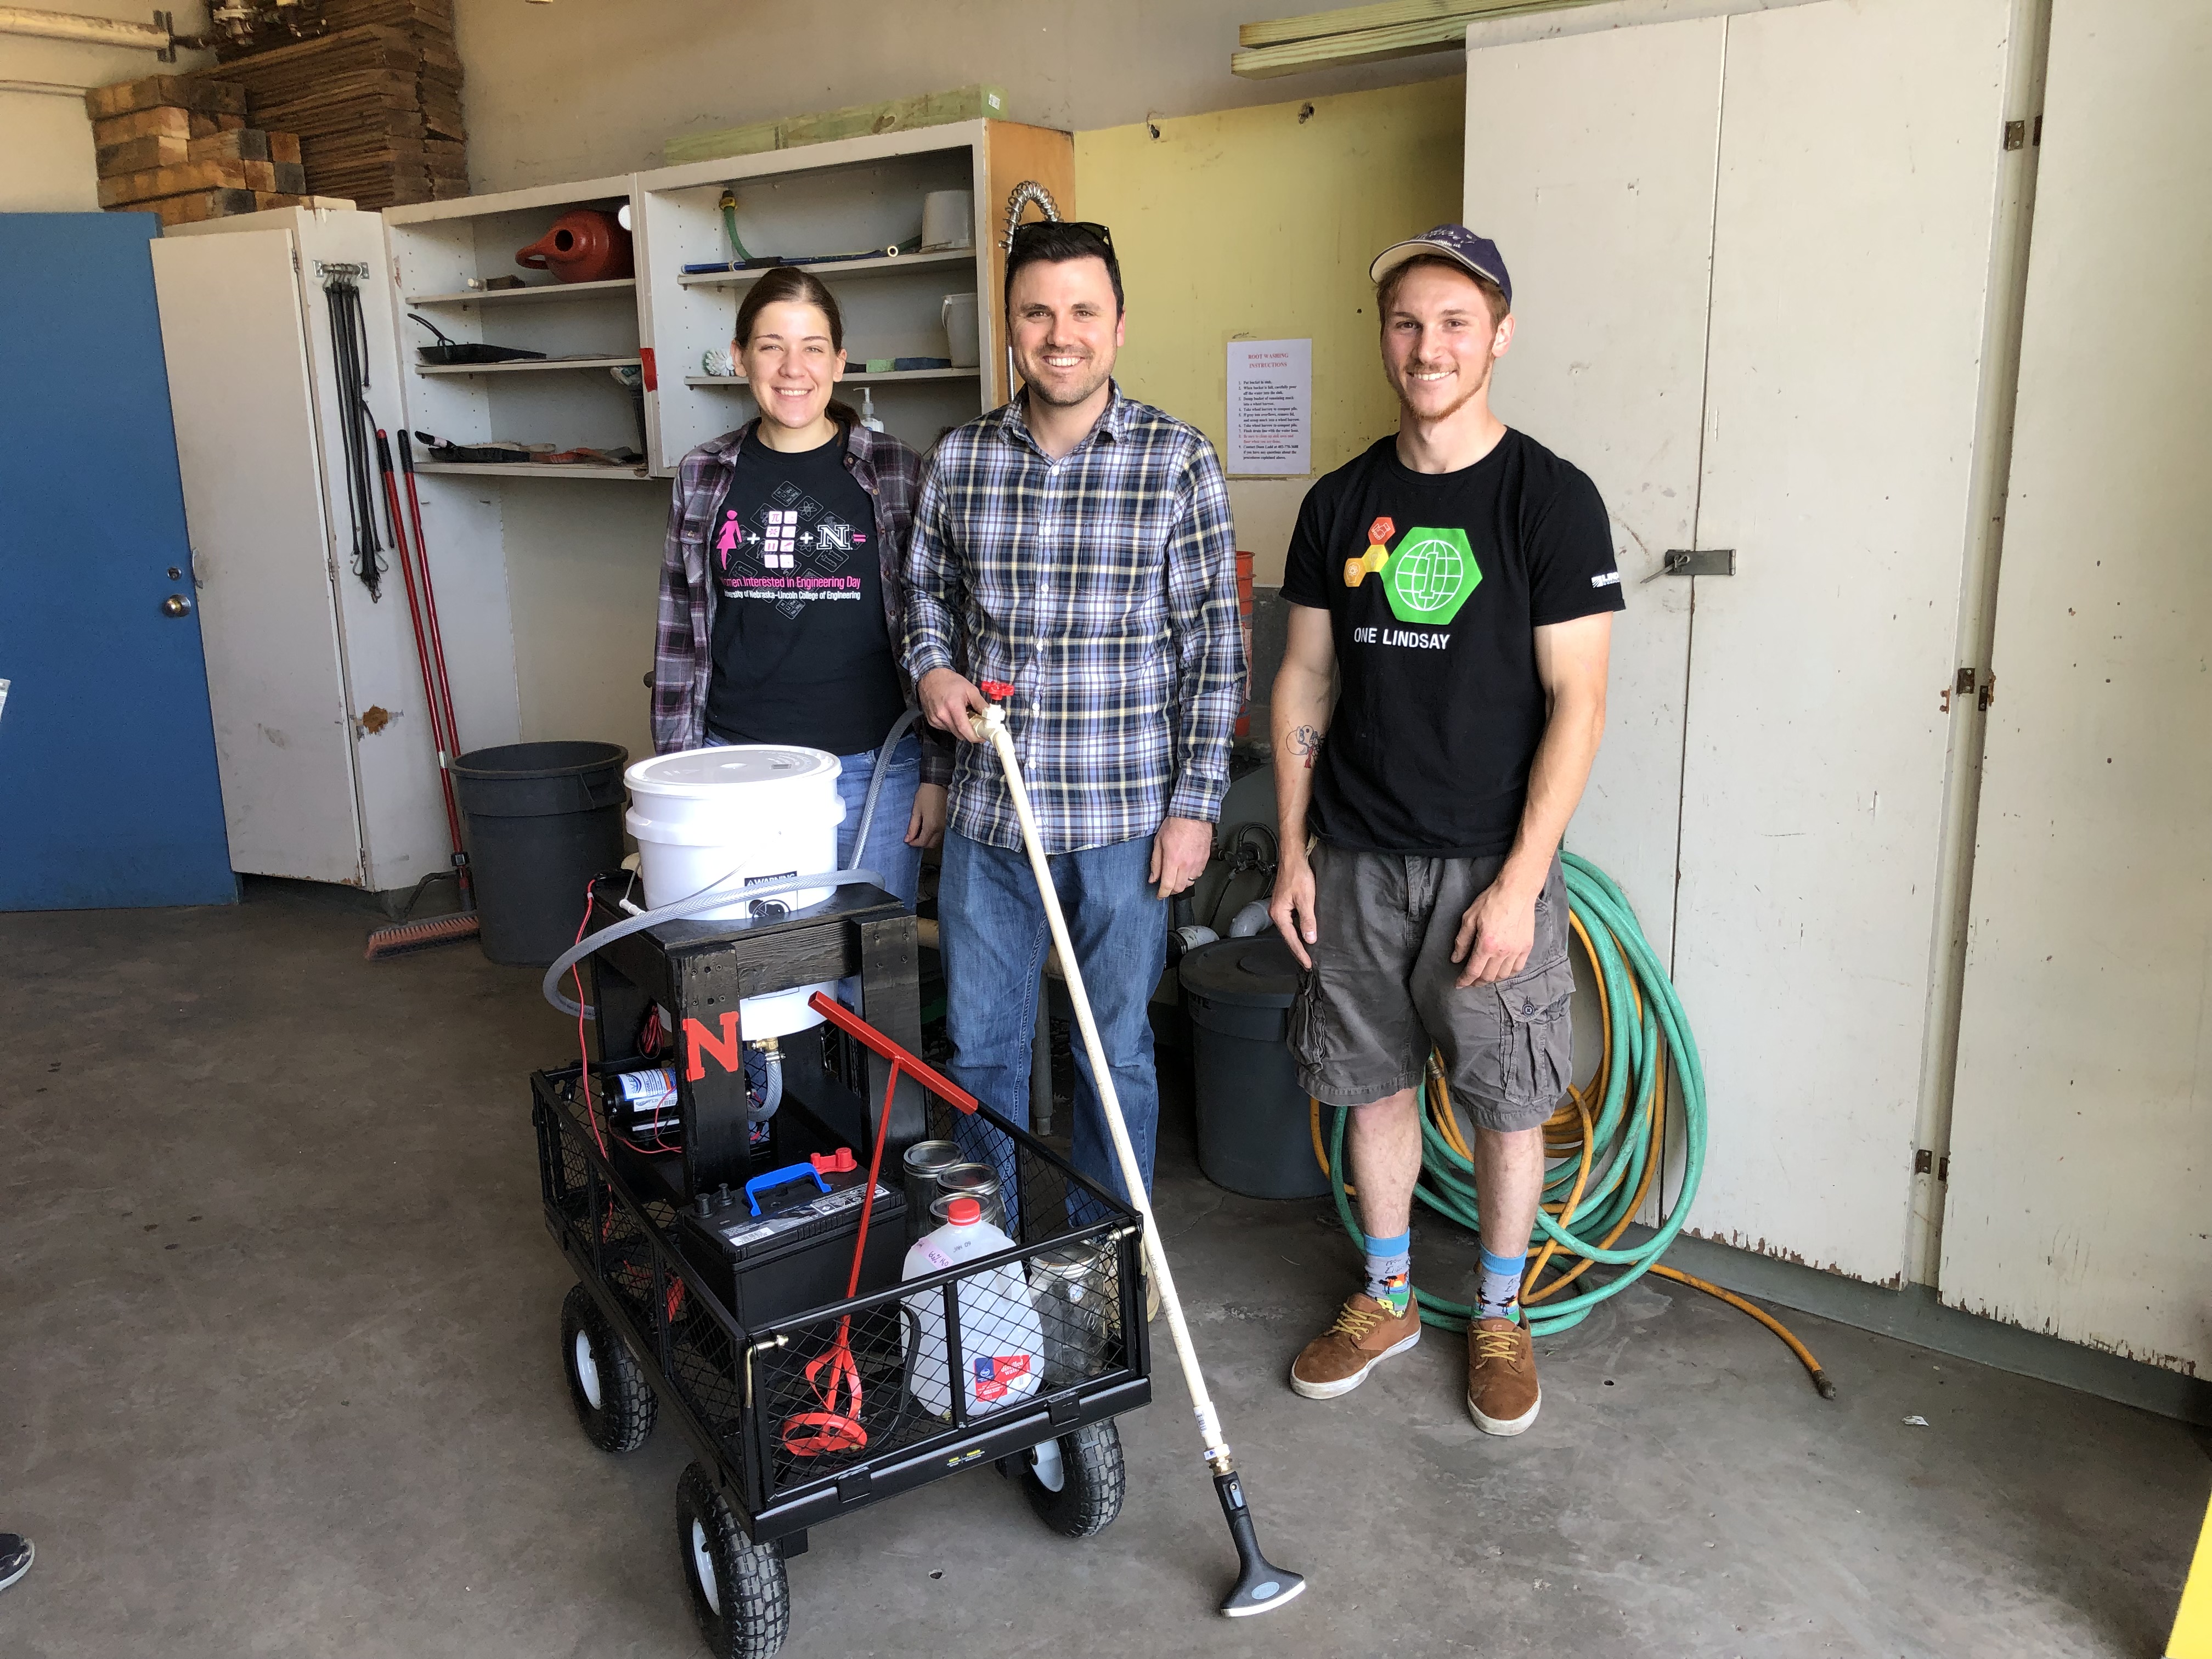 Kelsey Bohling (left) and Dalton Dozier (right) deliver their prototype biofilm application system to their client, Dr. Sam Wortman.